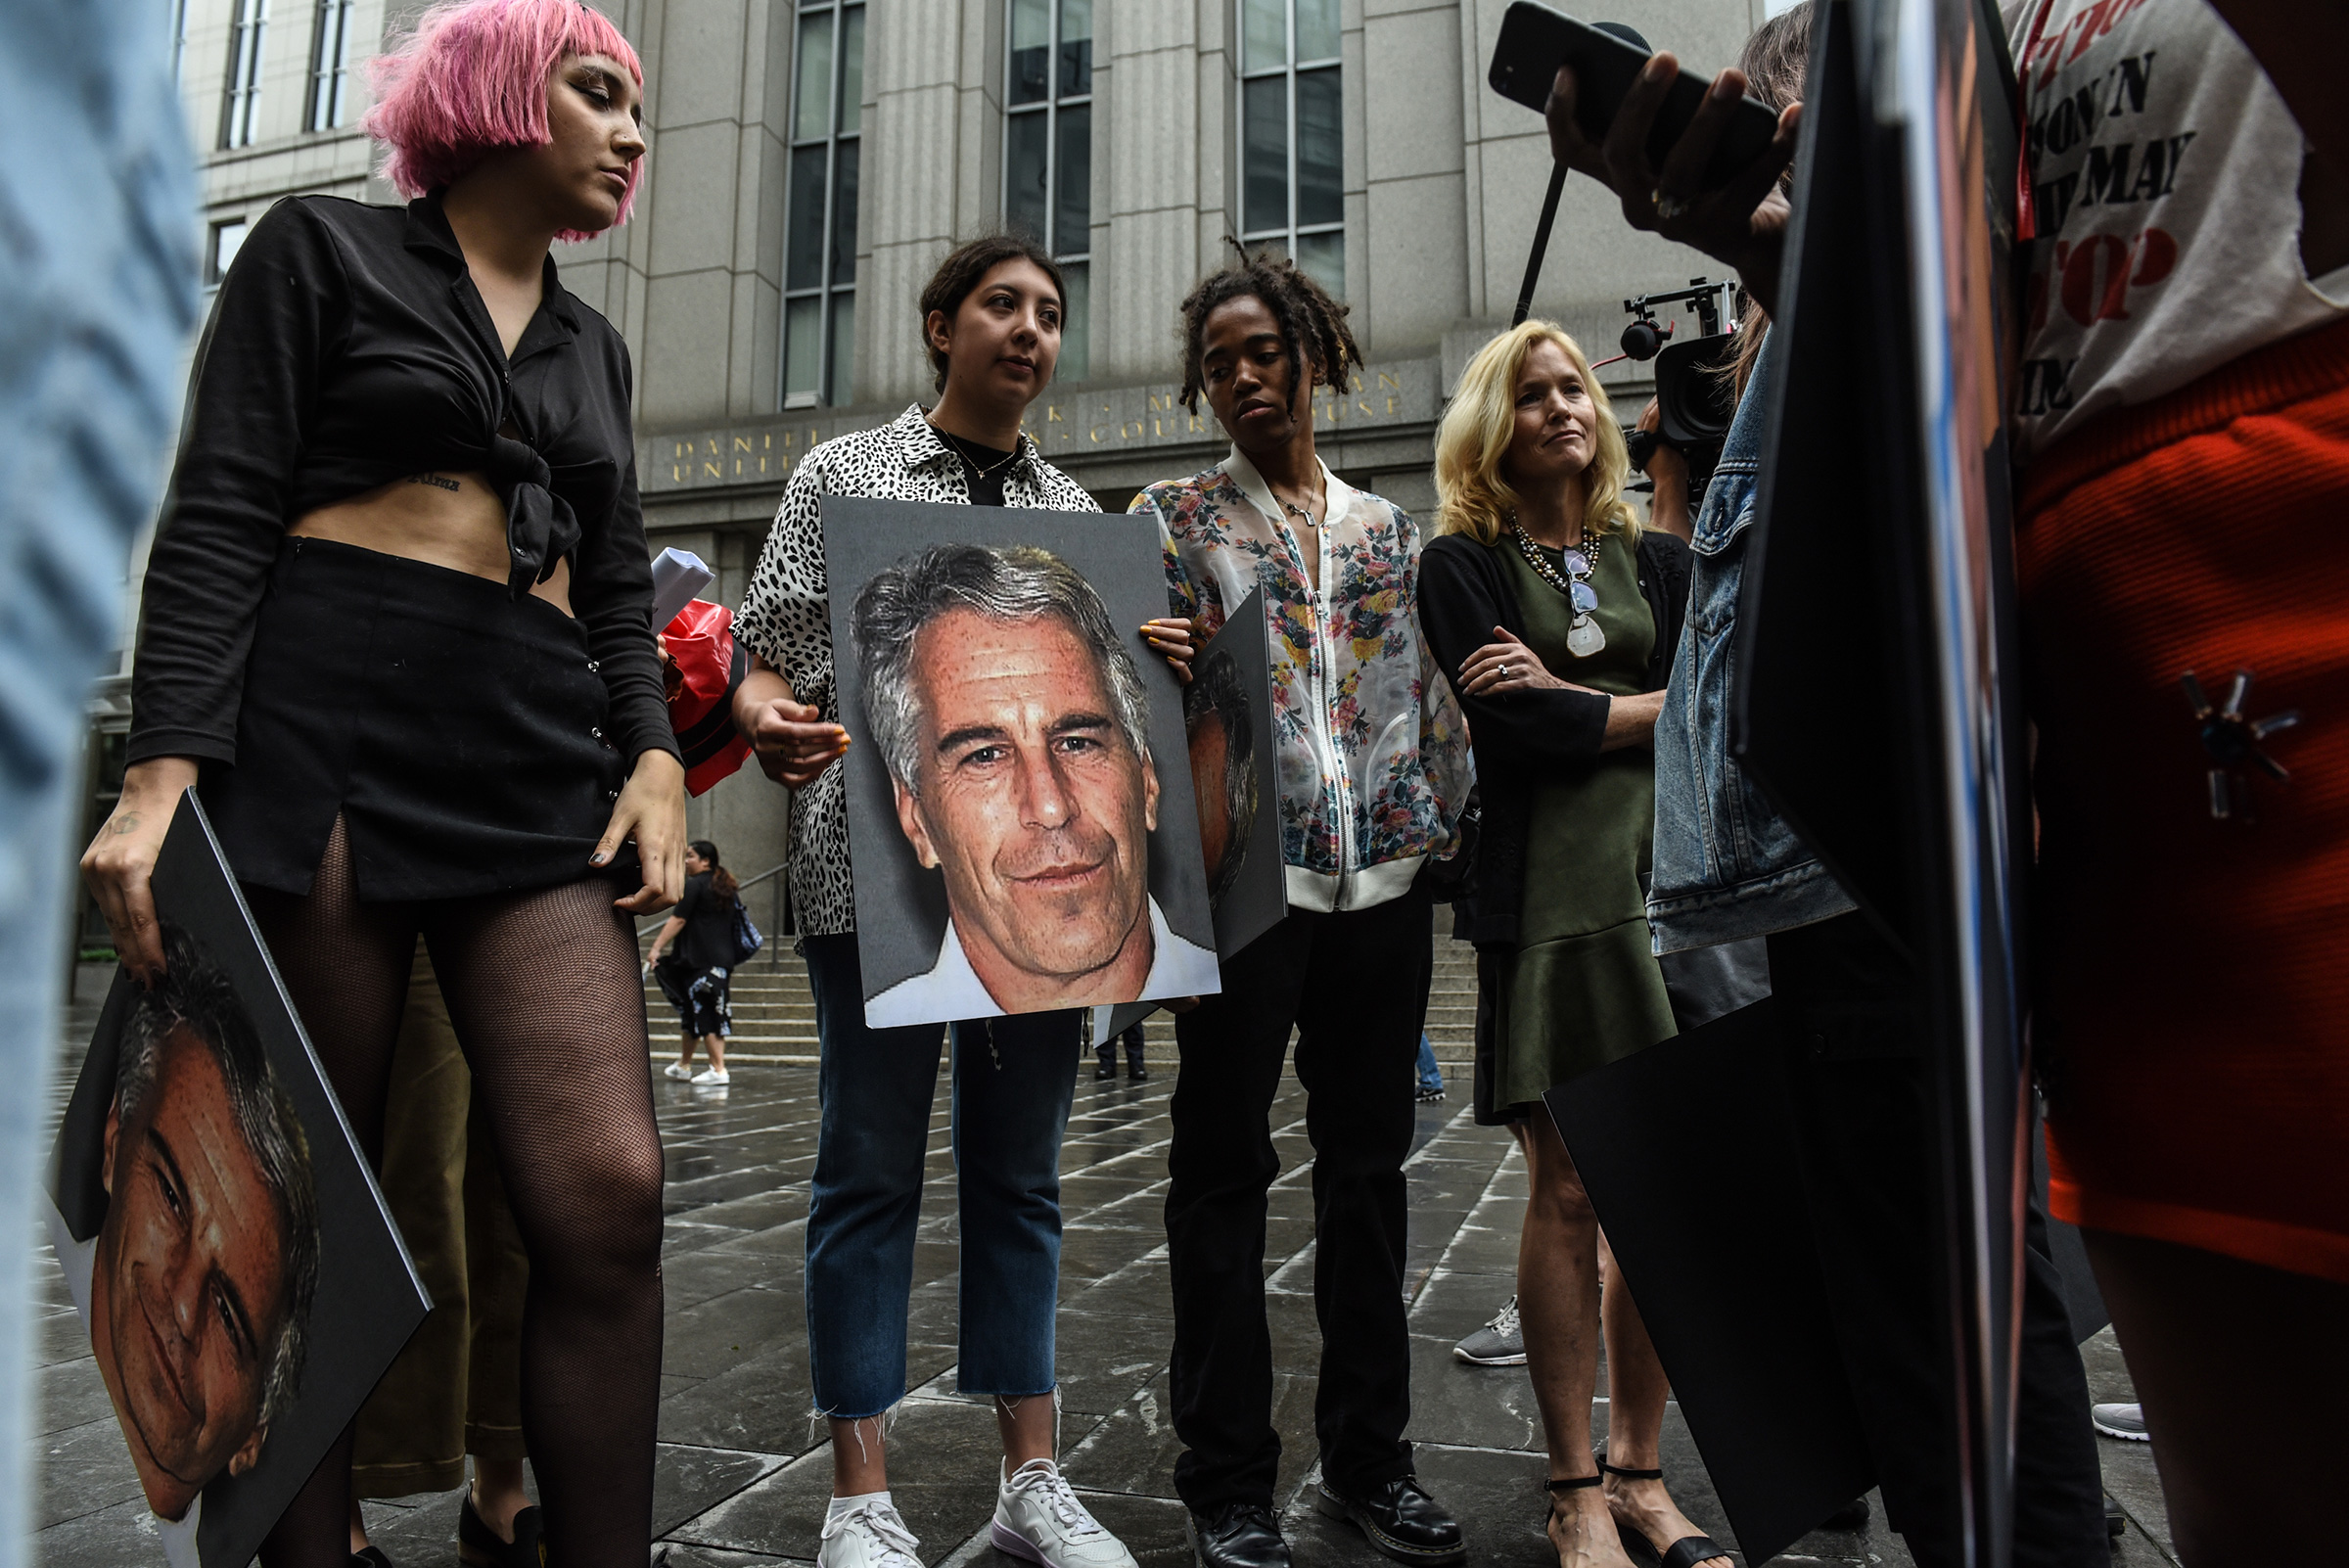 A protest group holds up signs of Jeffrey Epstein in front of the federal courthouse in New York City, July 8, 2019